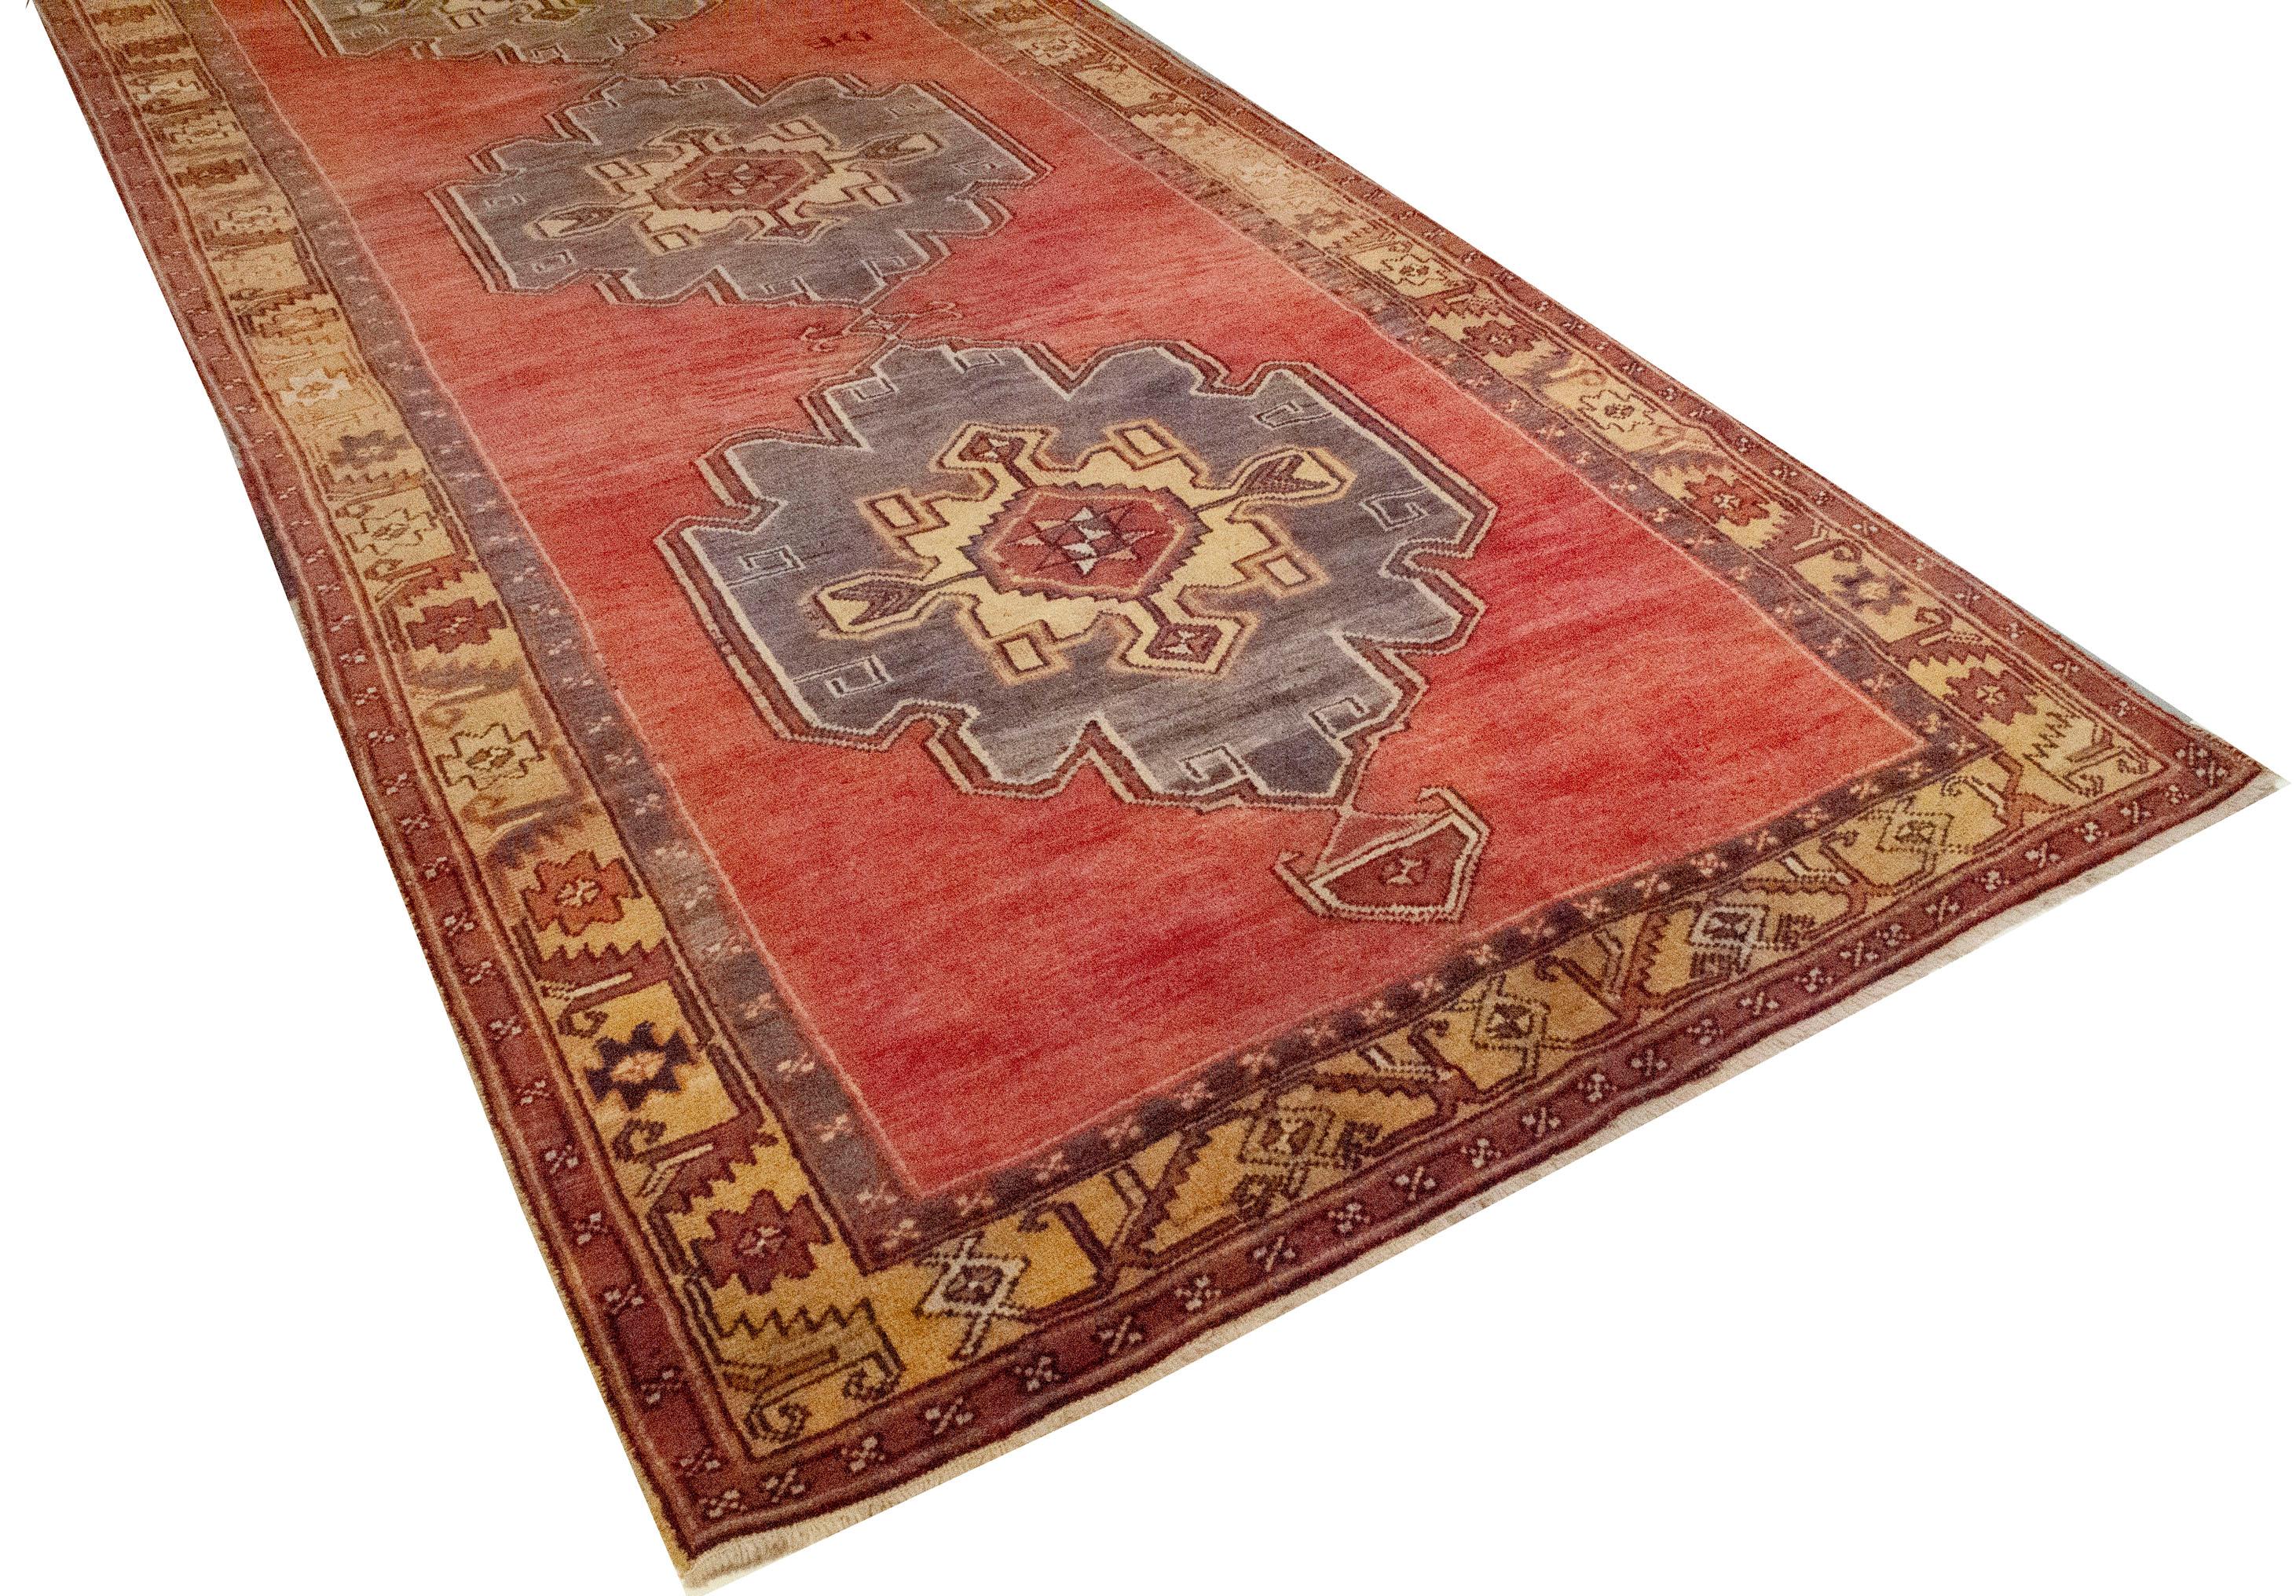 Vintage Anatolian-Oushak Gallery Size Rug Runner 5'3 X 12'7. Hand-woven in Turkey where rug weaving is the culture rather than a business. Rugs from Turkey are known for the high quality of their wool their beautiful patterns and warm colors. These